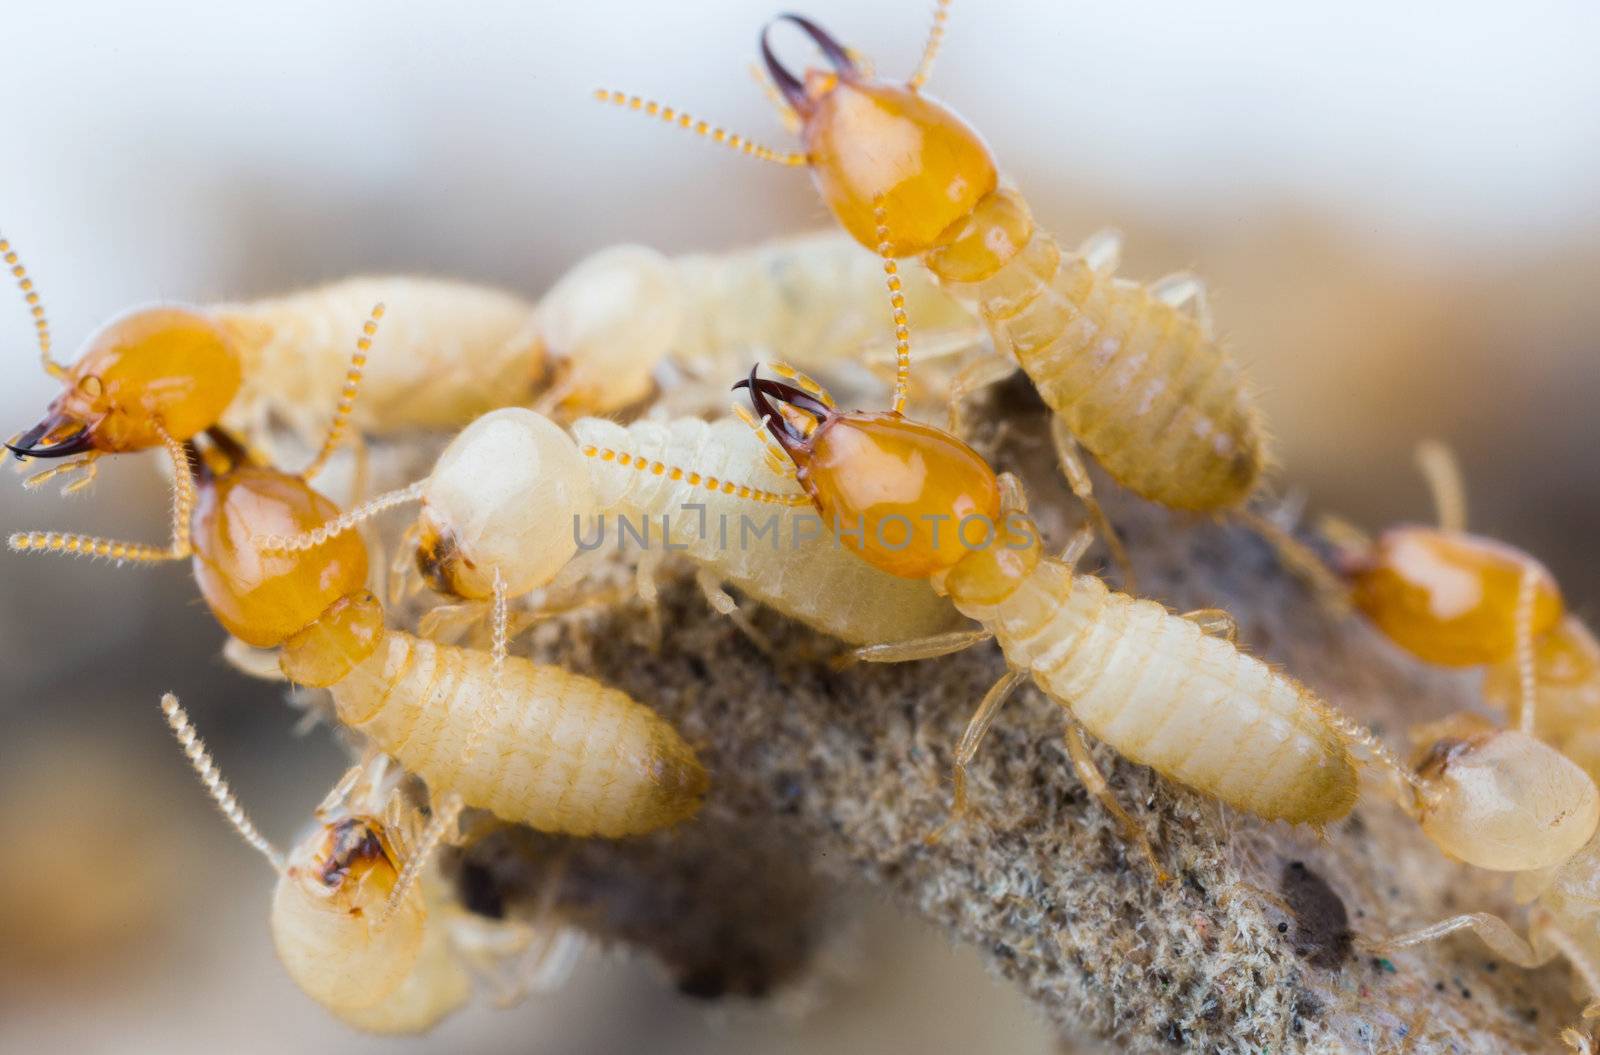 Termites in Thailand by smuay